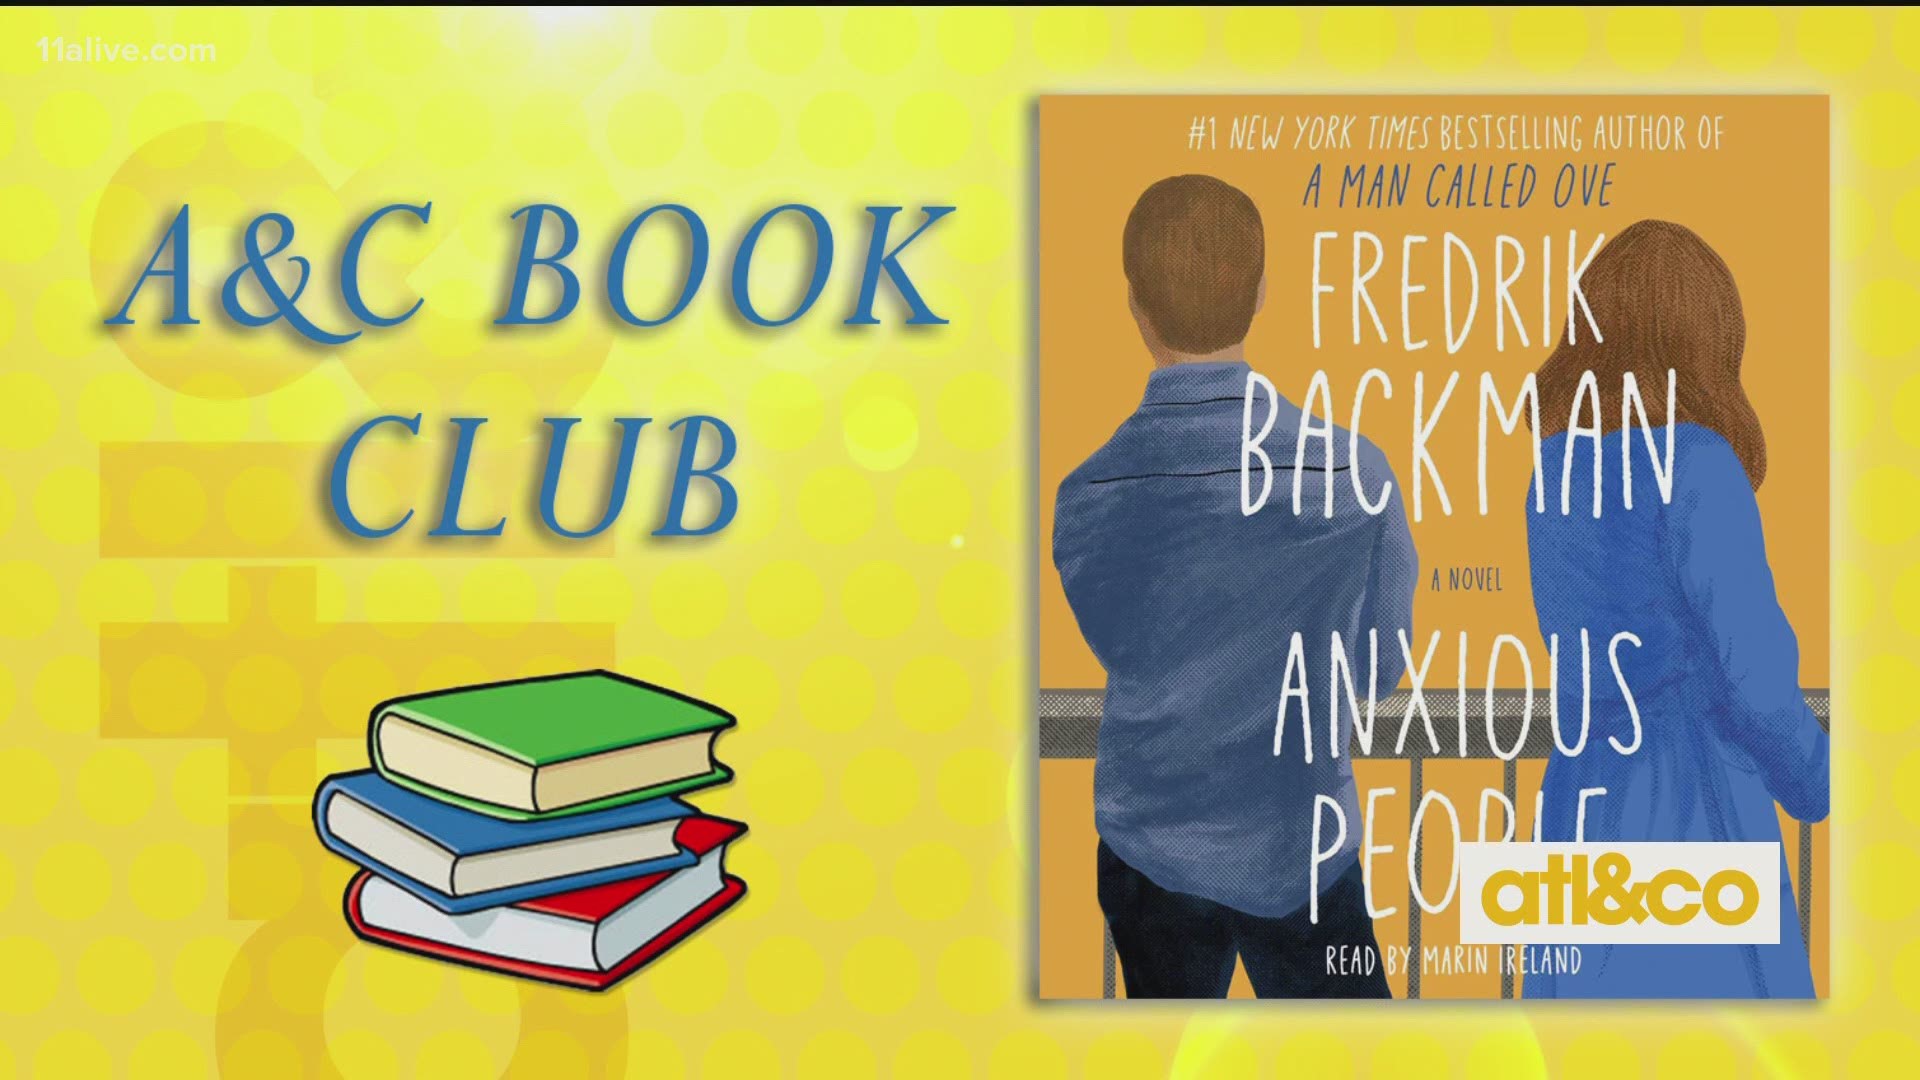 Check out our latest A&C Book Club selection 'Anxious People' by Fredrik Backman.